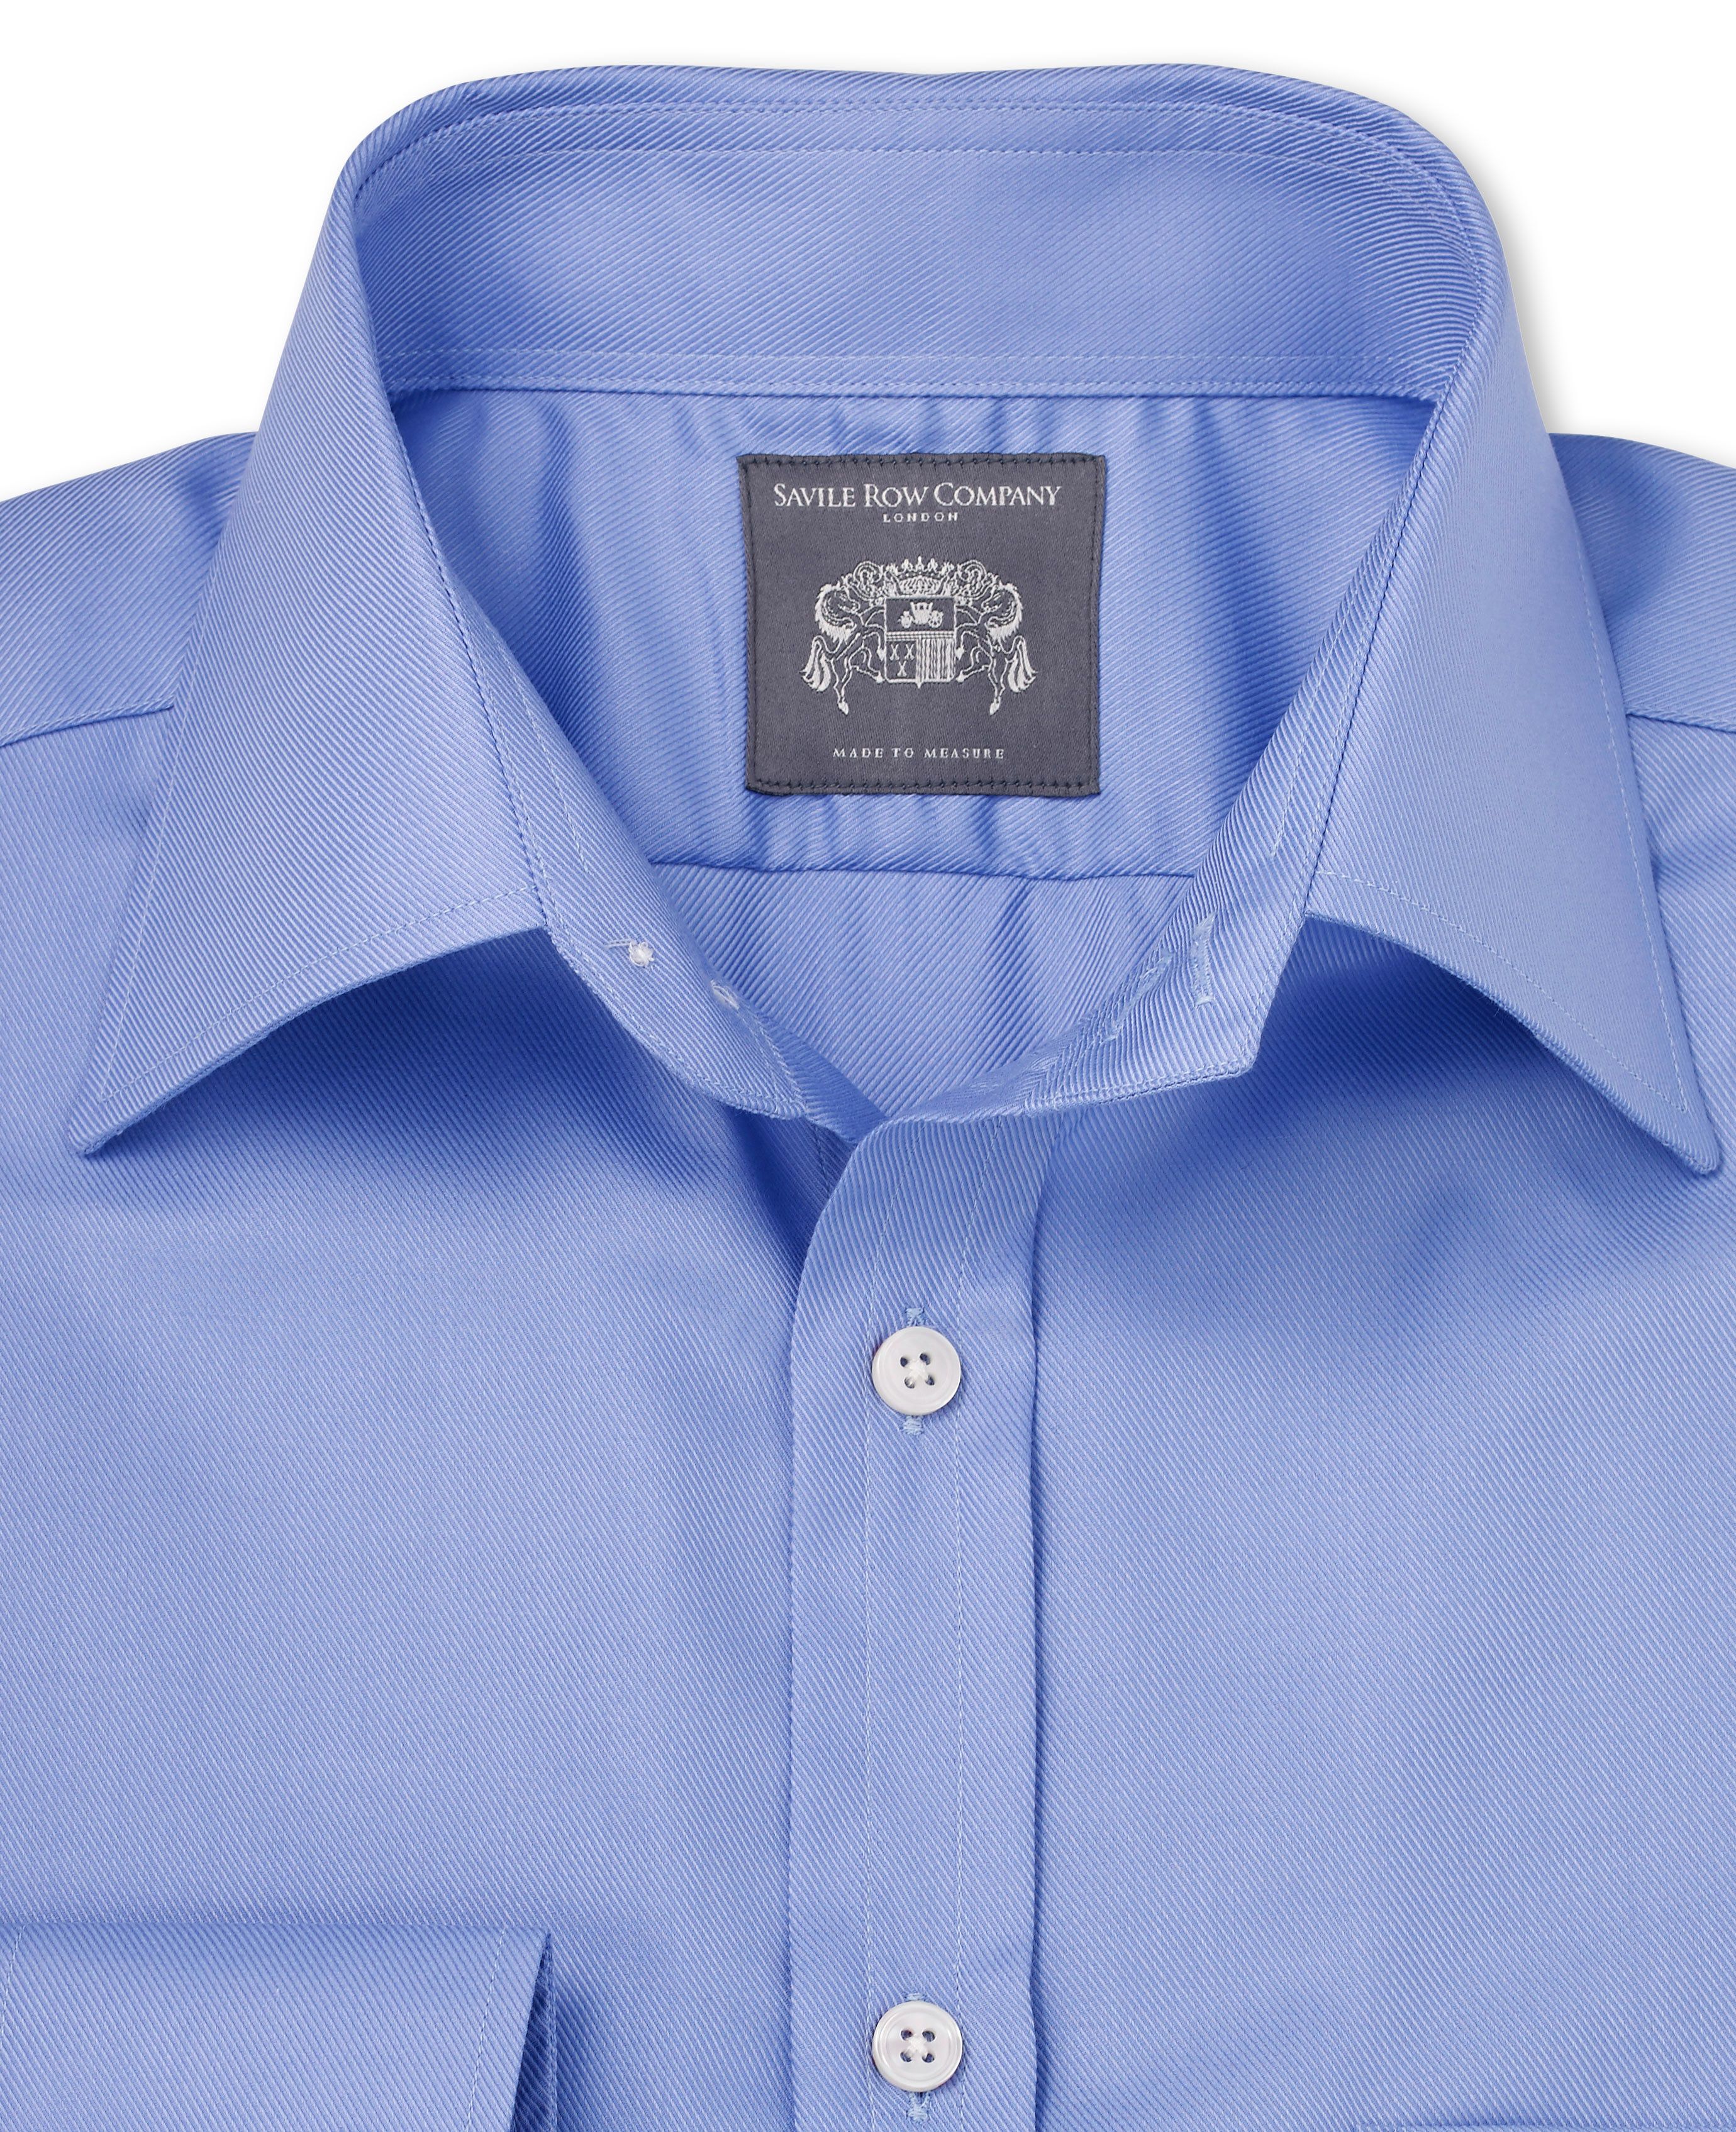 own blue twill made to shirts online Savile Row Co